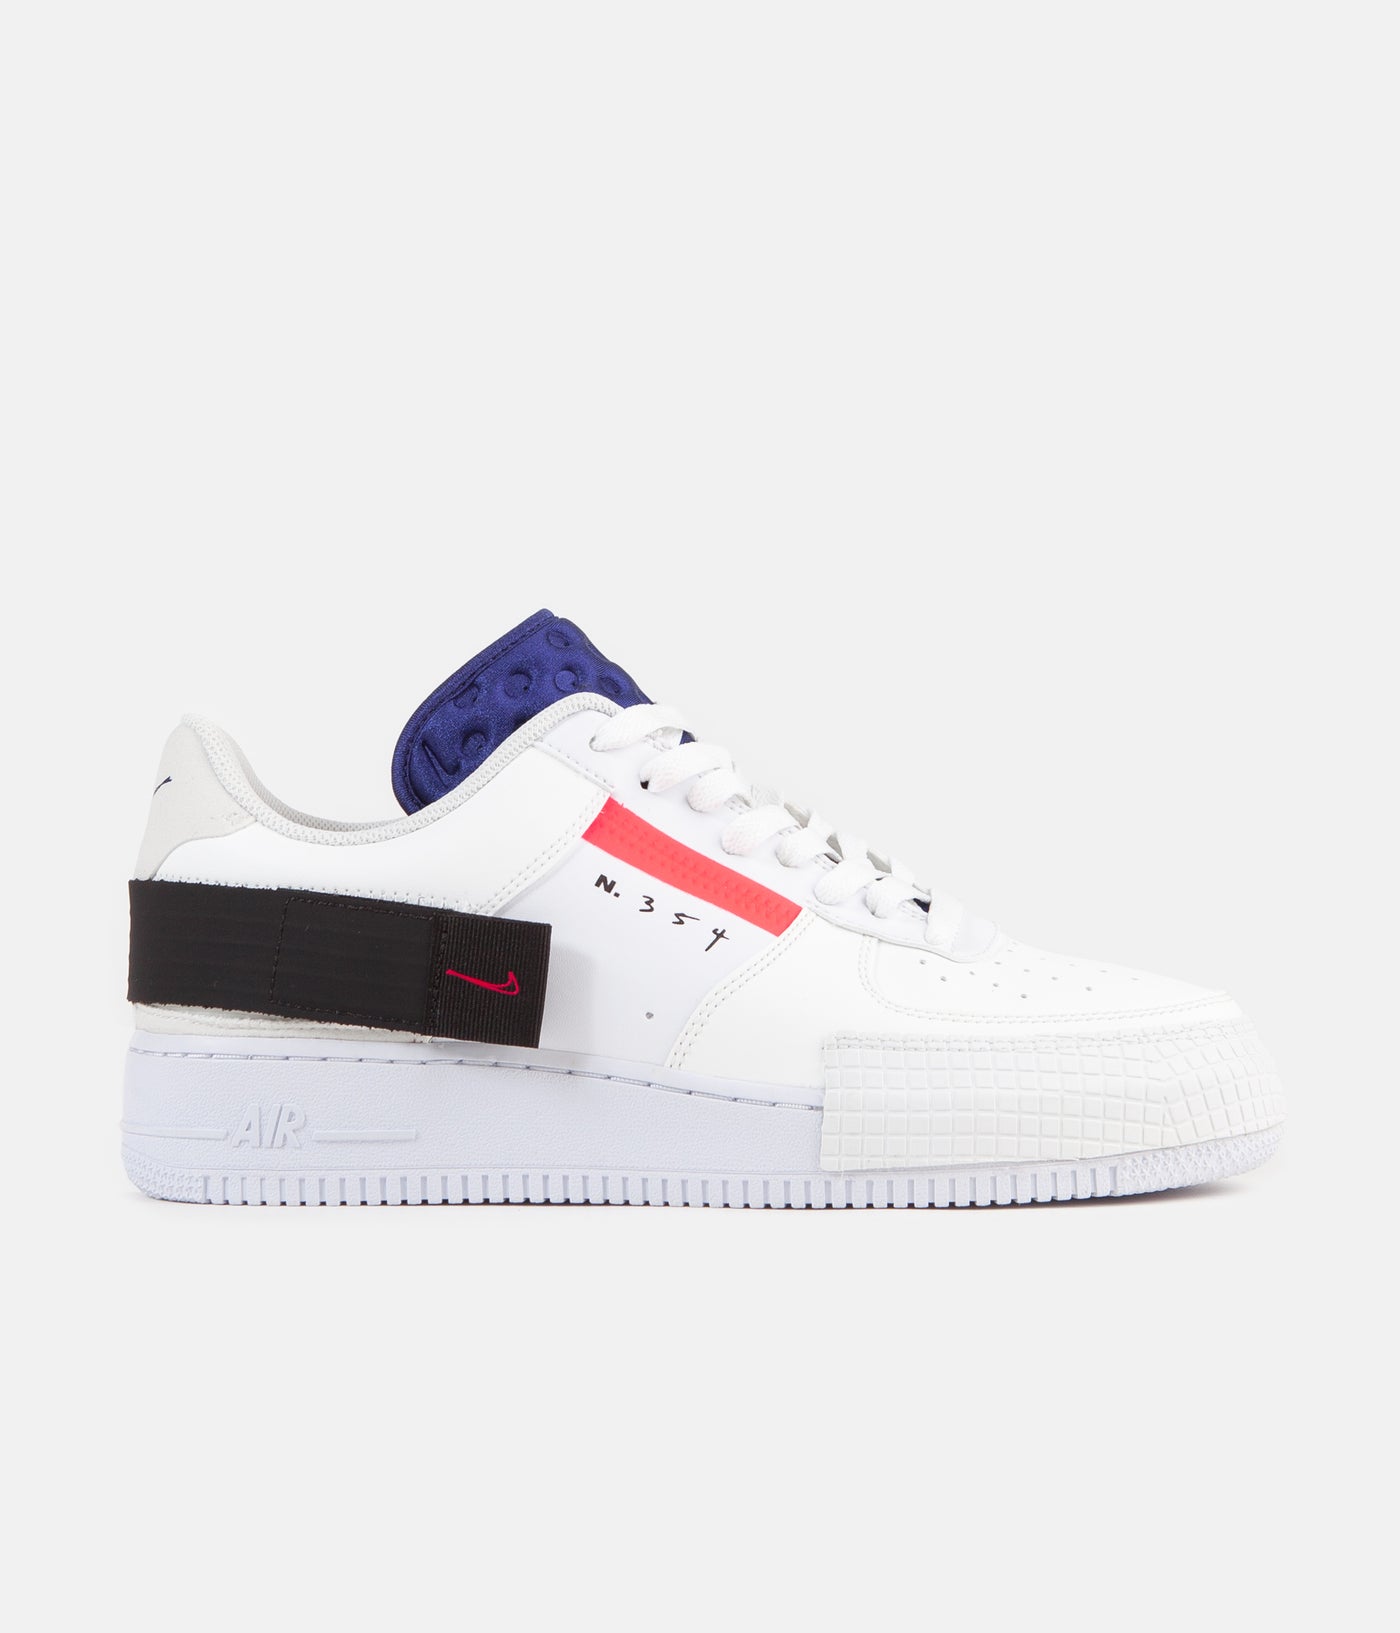 Nike Air Force 1 Type Shoes - Summit White / Red Orbit - White - Black ...